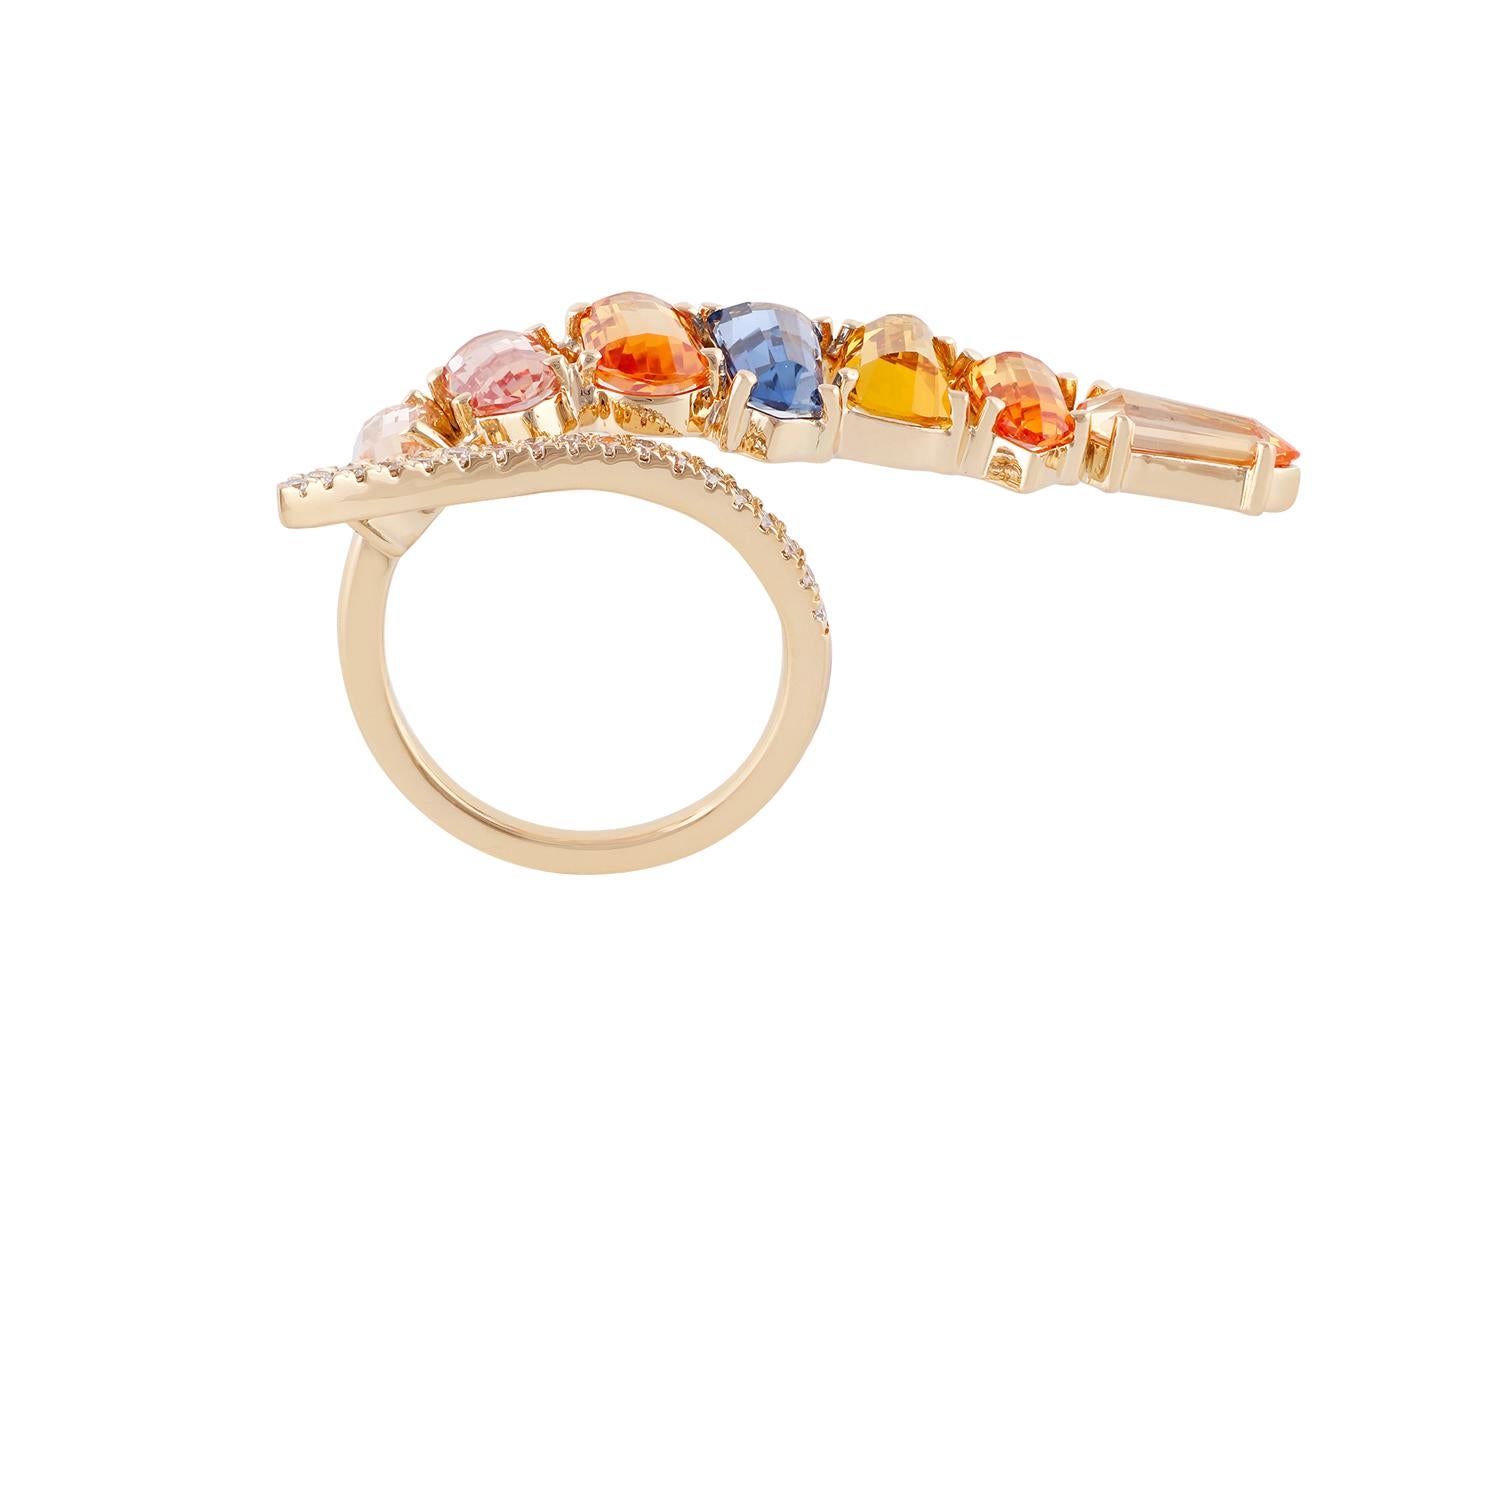 Contemporary Multi Sapphire & Diamond Ring Studded in 18k Gold